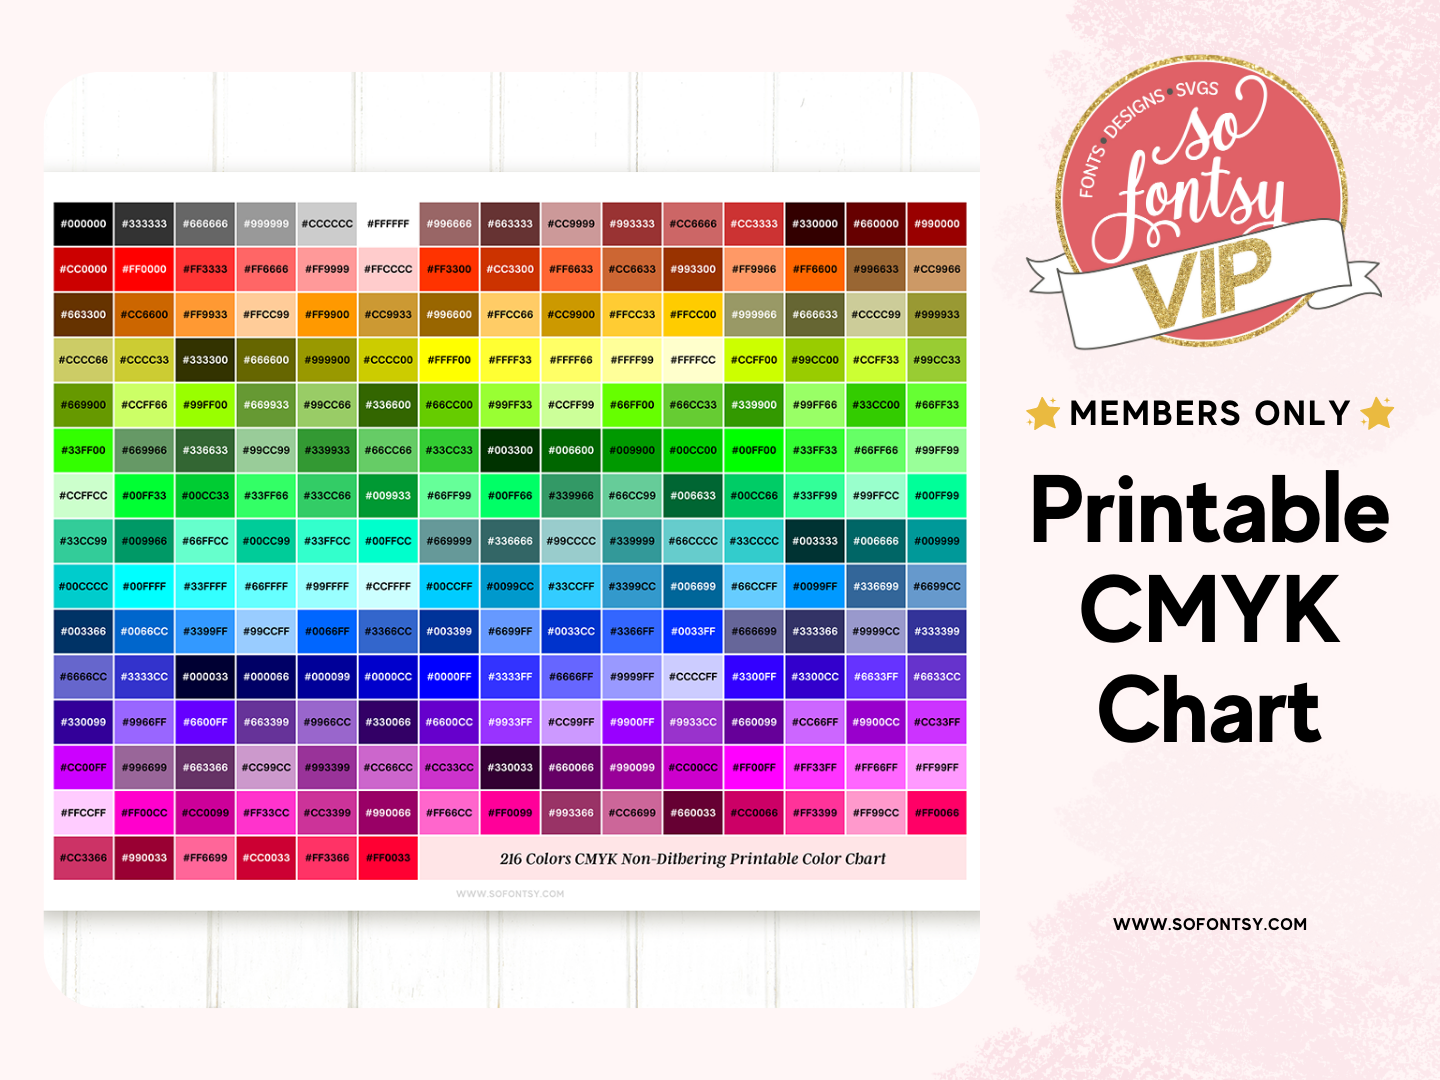 Printable CMYK Color Chart for So Fontsy VIP Members